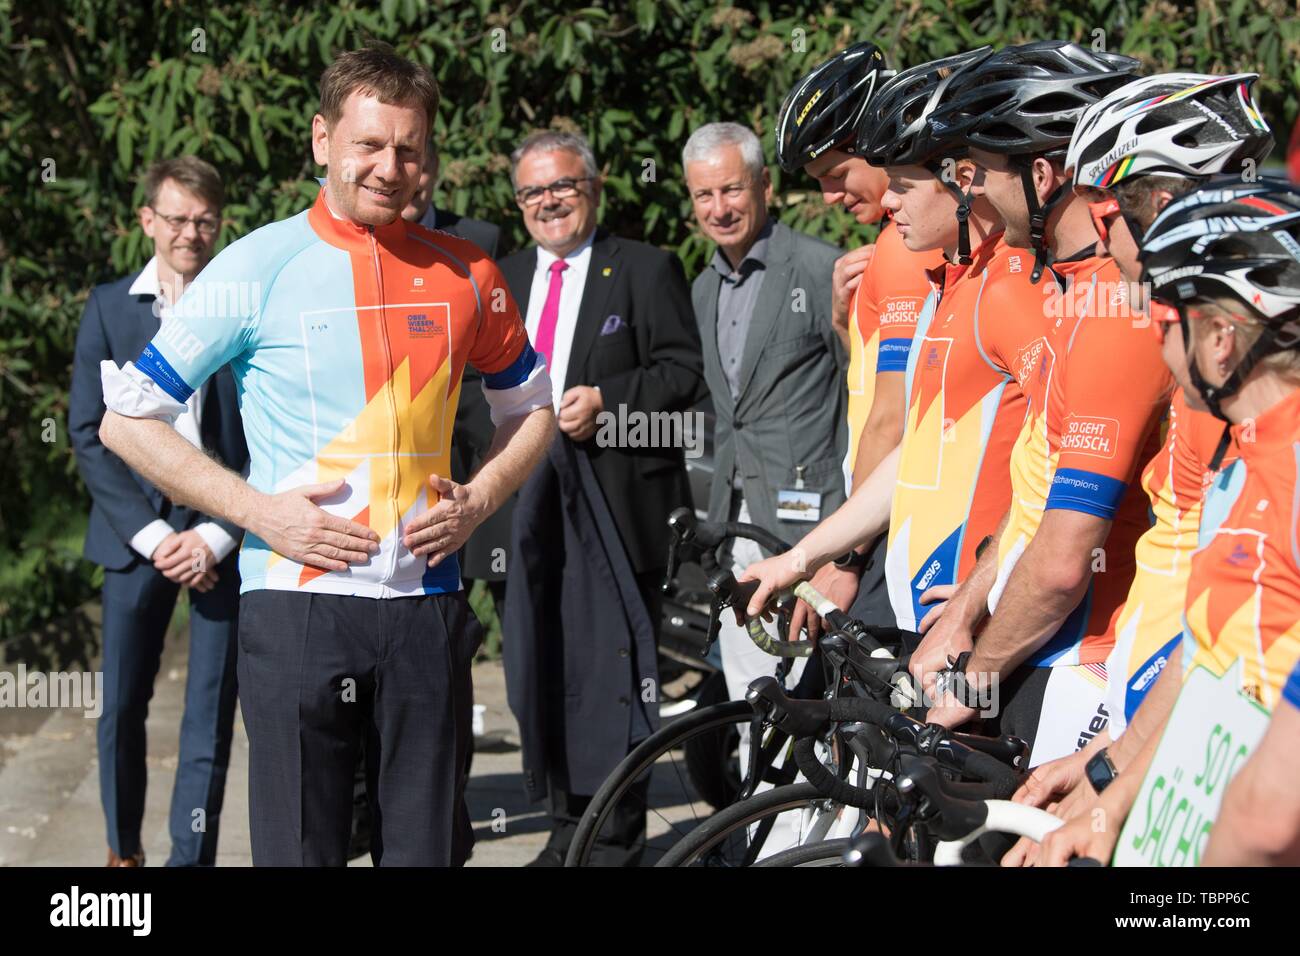 Dresden, Germany. 03rd June, 2019. Michael Kretschmer (CDU, l), Prime Minister of Saxony, wears a cycling jersey for the start of the summer cycle tour for the upcoming Nordic Junior World Championship 2020 in Oberwiesenthal, Saxony. On the same day, organisers and athletes from Dresden will start by bicycle in the direction of Oberwiesenthal to draw attention to this major event. Credit: Sebastian Kahnert/dpa-Zentralbild/ZB/dpa/Alamy Live News Stock Photo